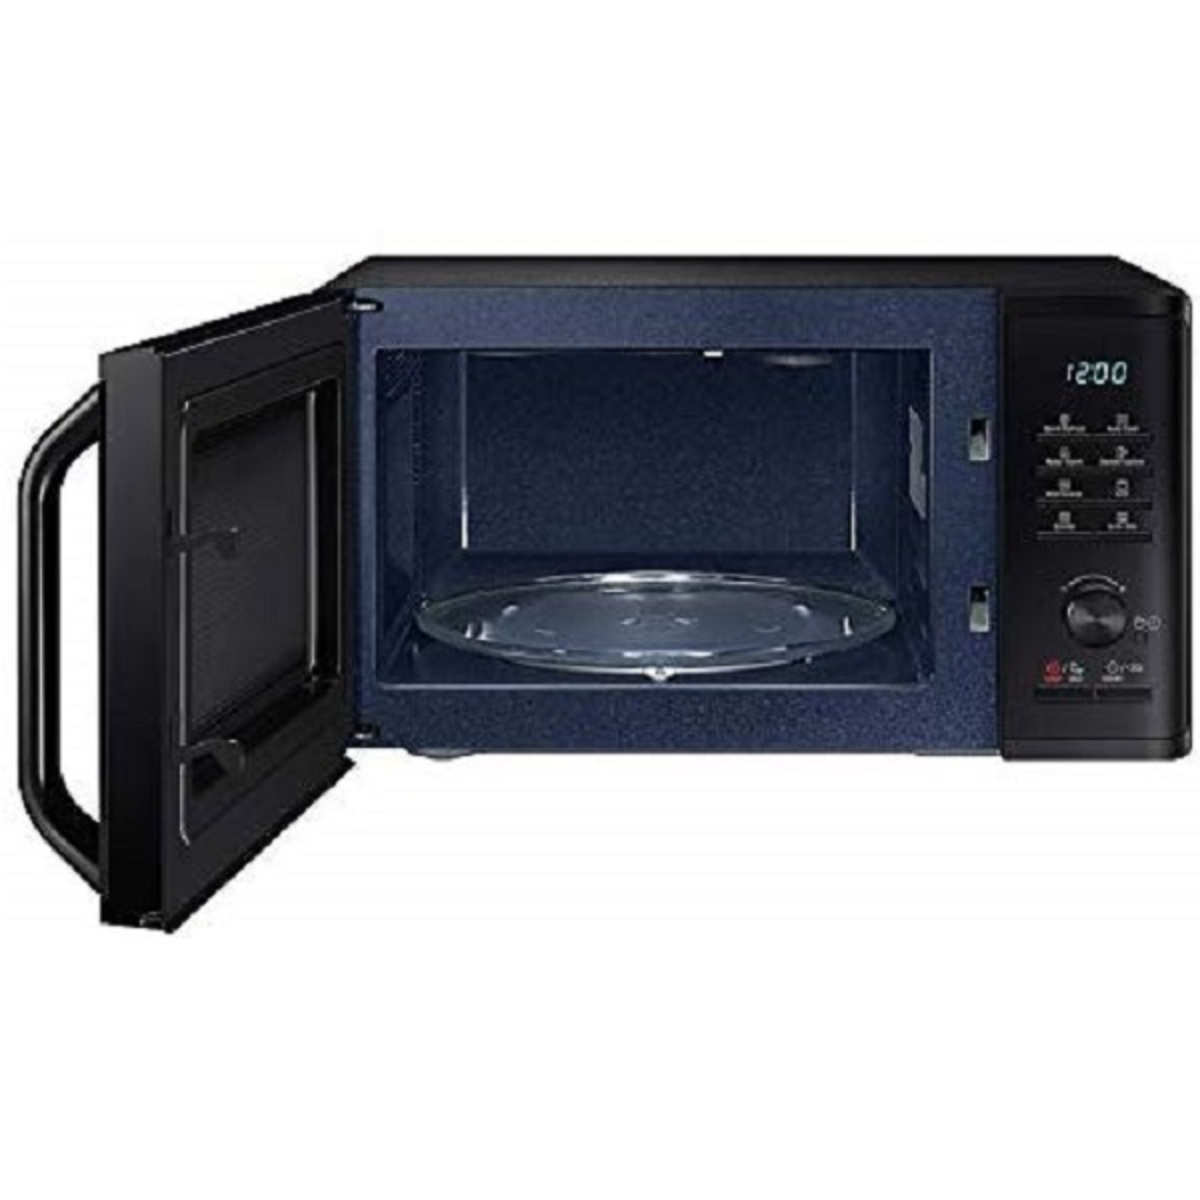 Samsung Microwave Oven MG23K3515AK Grill